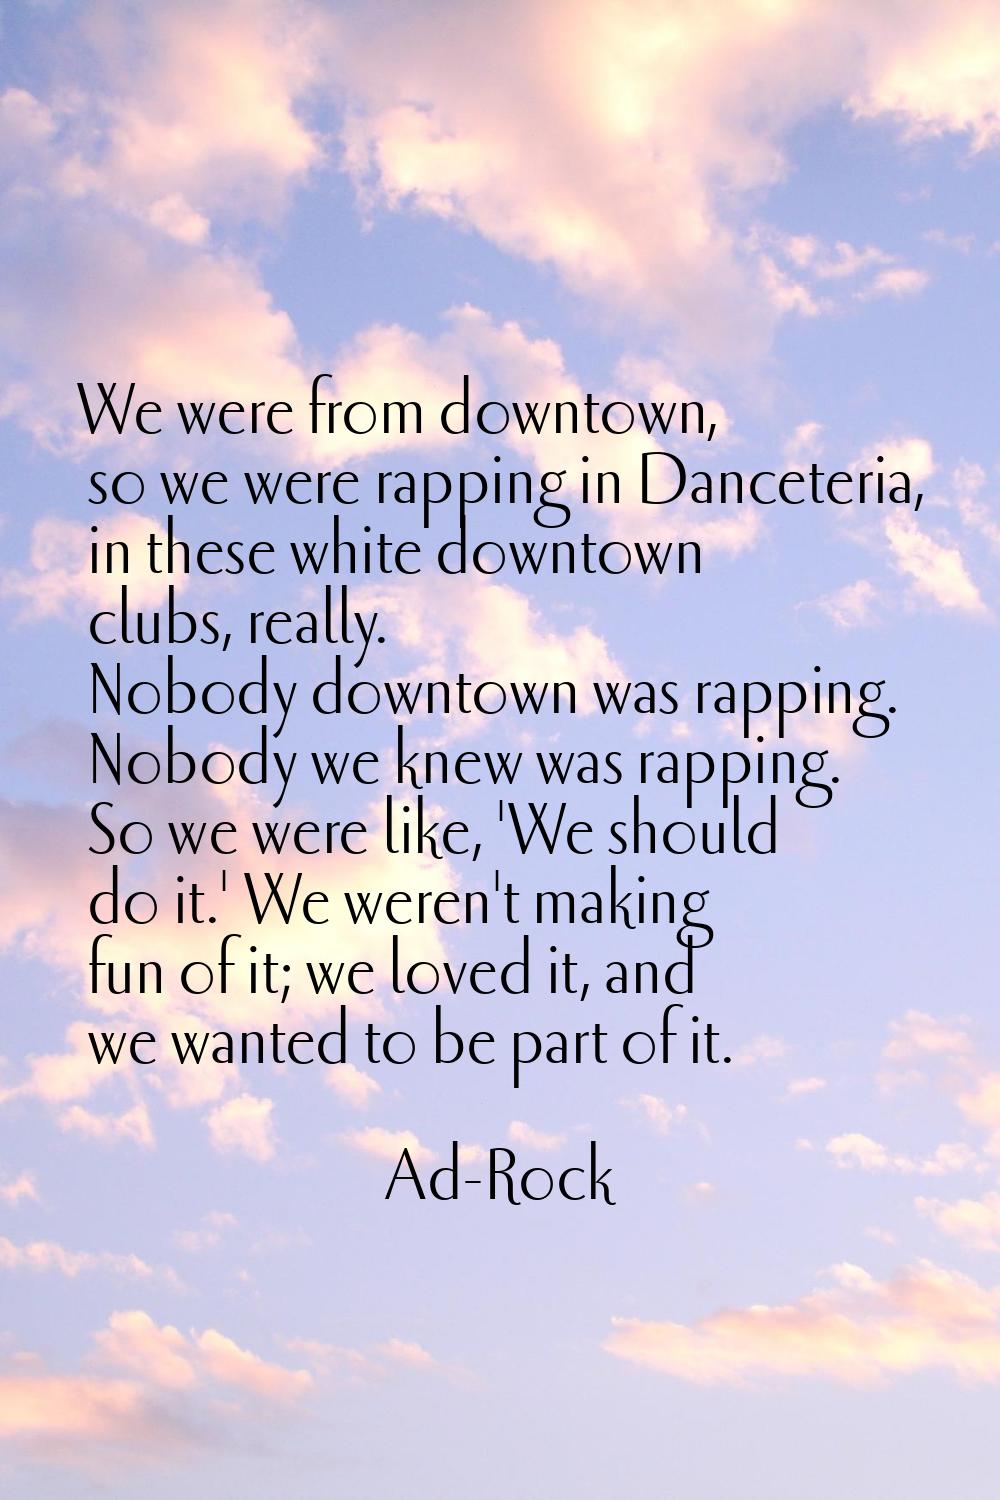 We were from downtown, so we were rapping in Danceteria, in these white downtown clubs, really. Nob